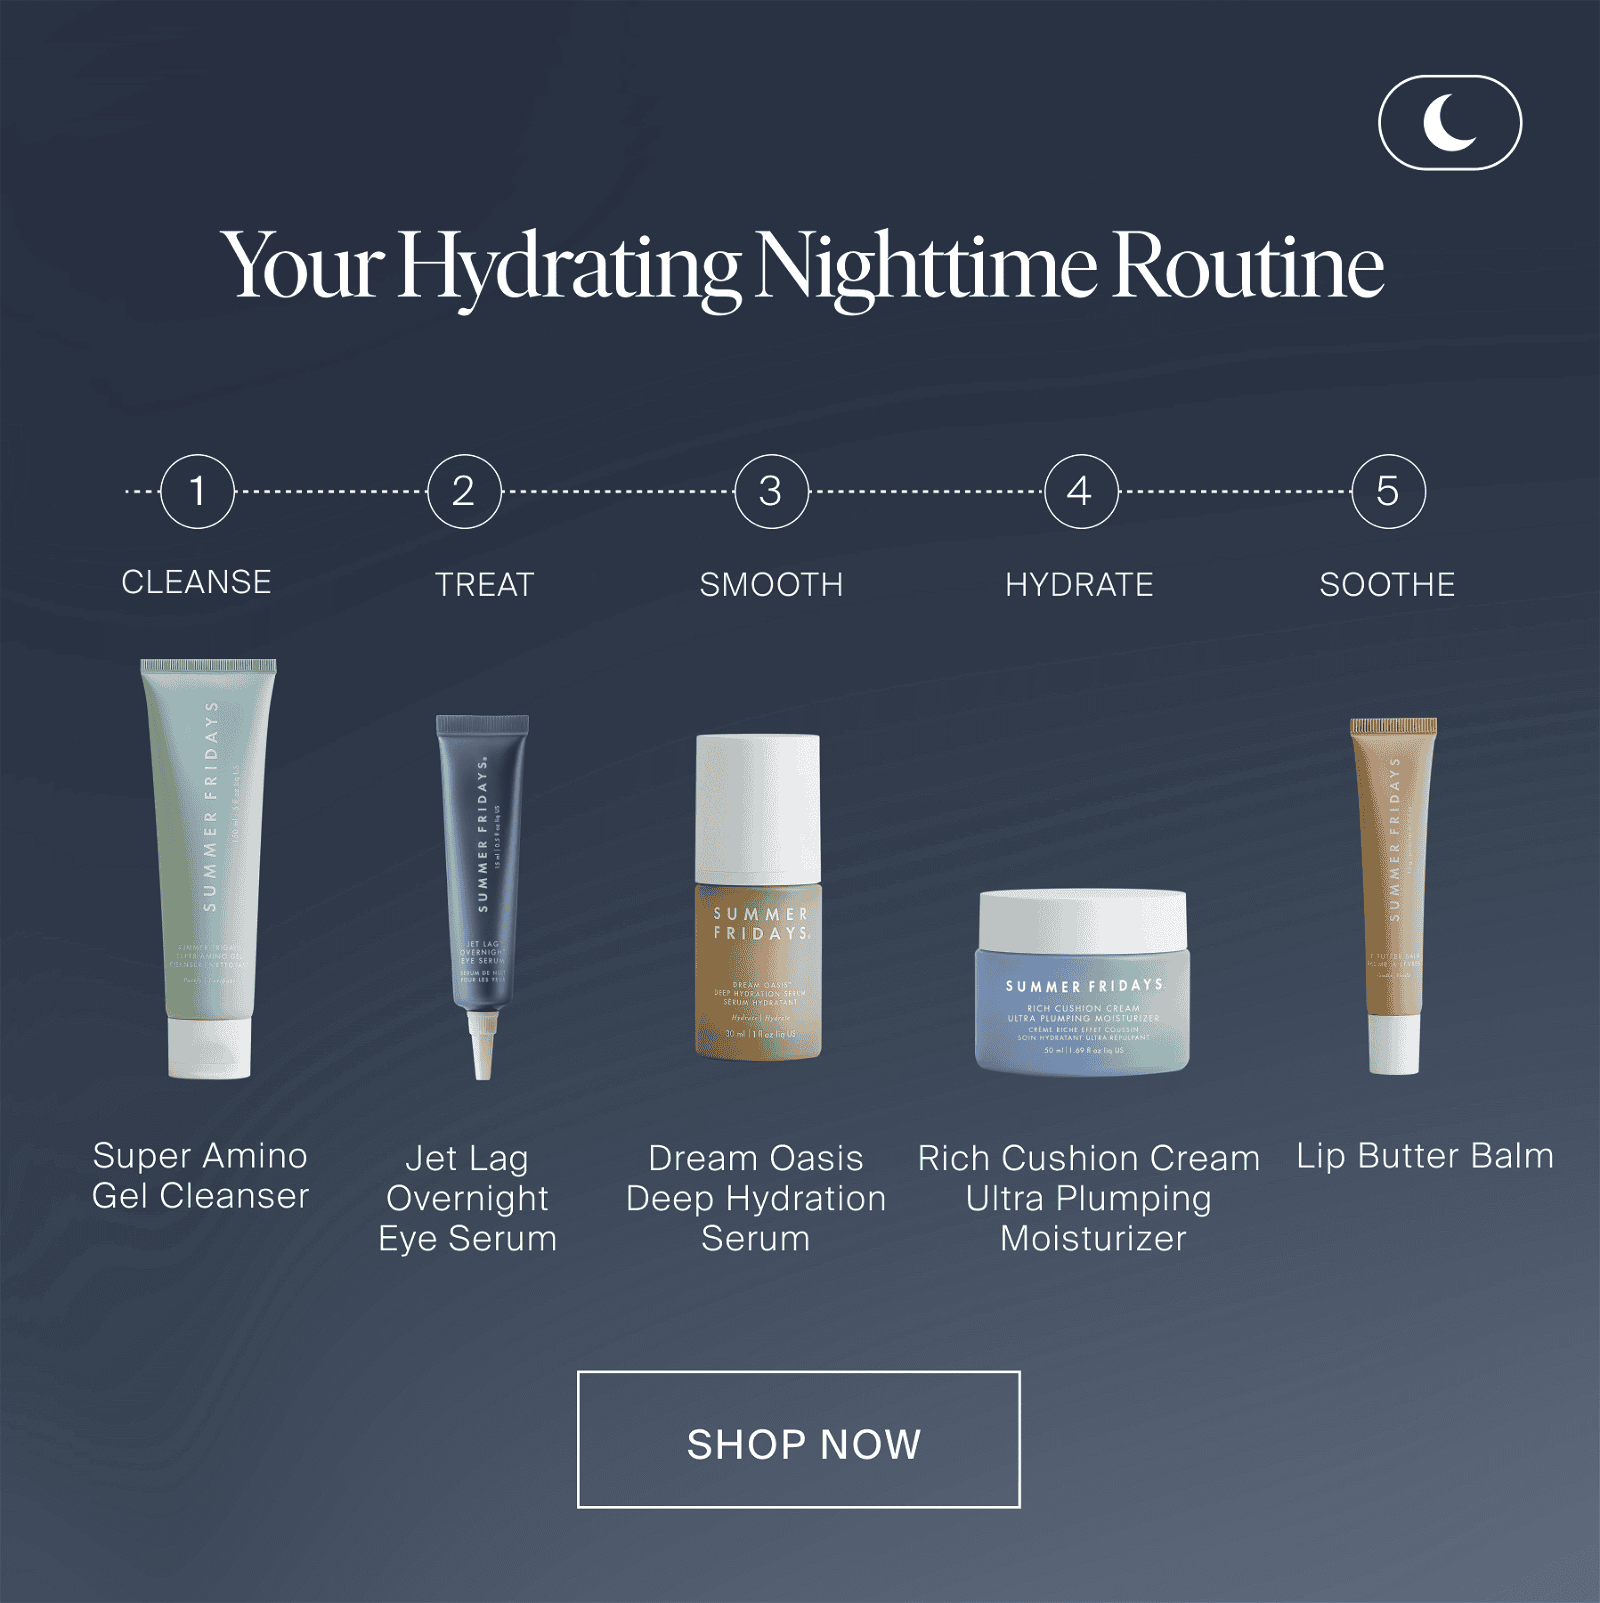 Your Hydrating Nighttime Routine